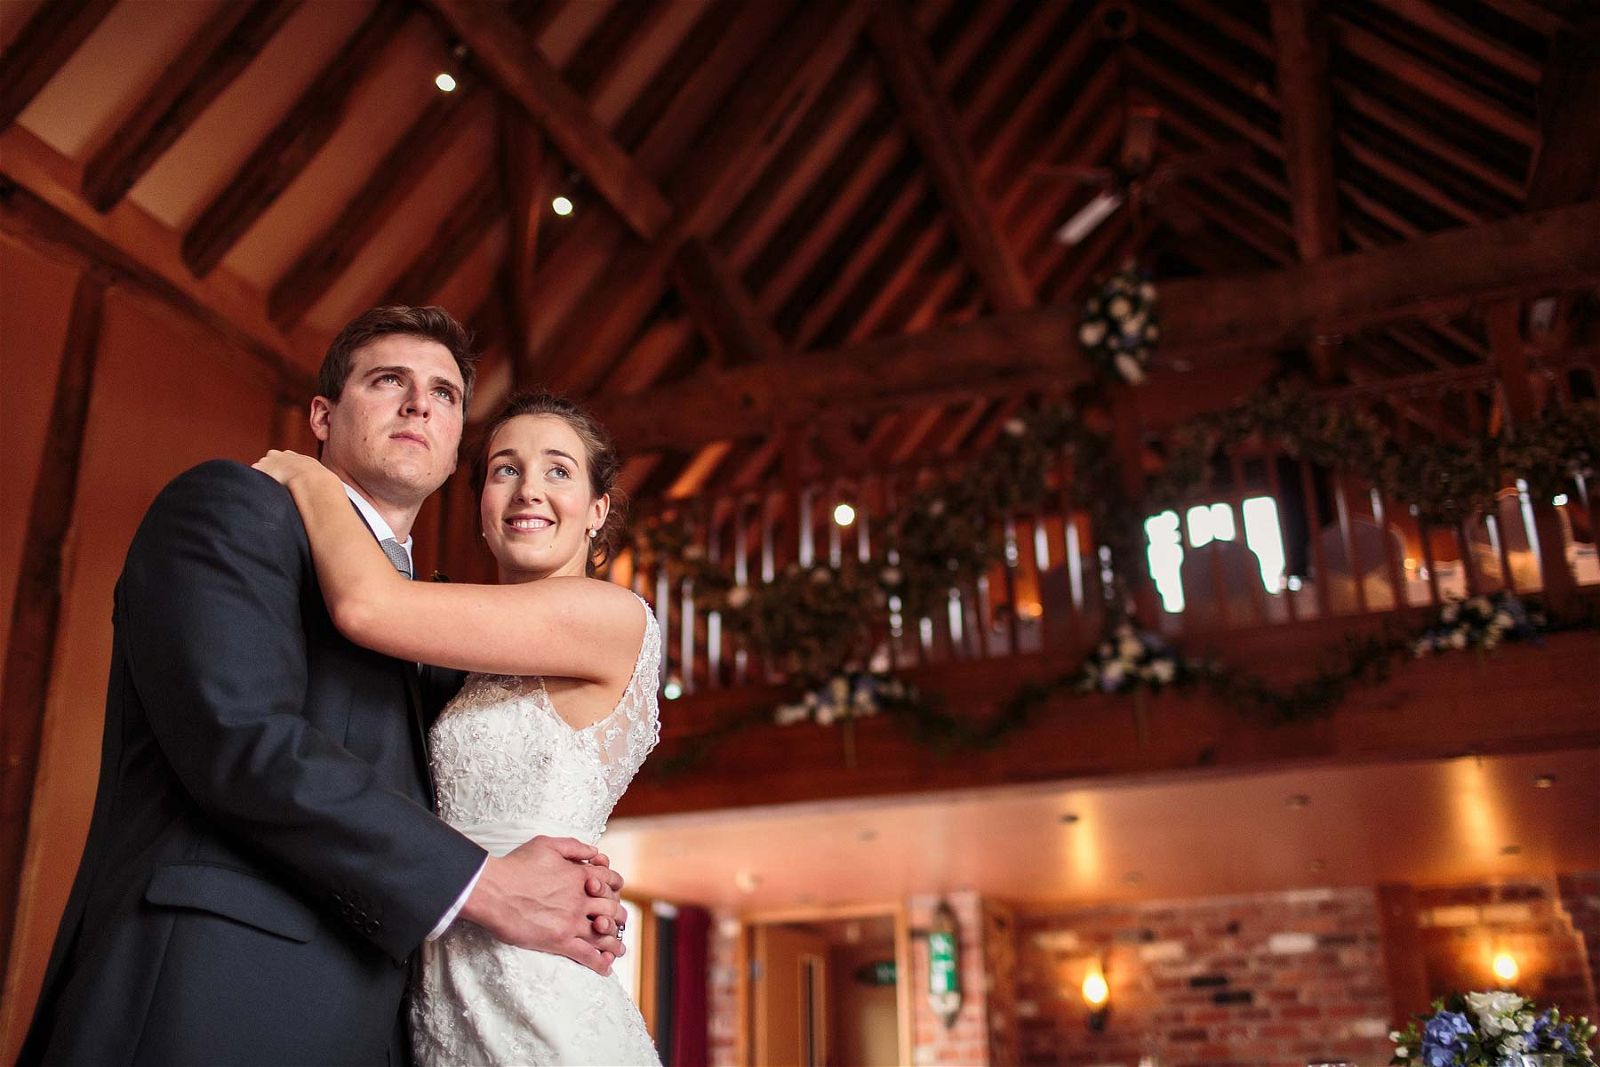 A wonderful intimate embrace between the Bride and Groom in the Tithe Barn at Hundred House Hotel in Norton by Shropshire Documentary Wedding Photographer Stuart James